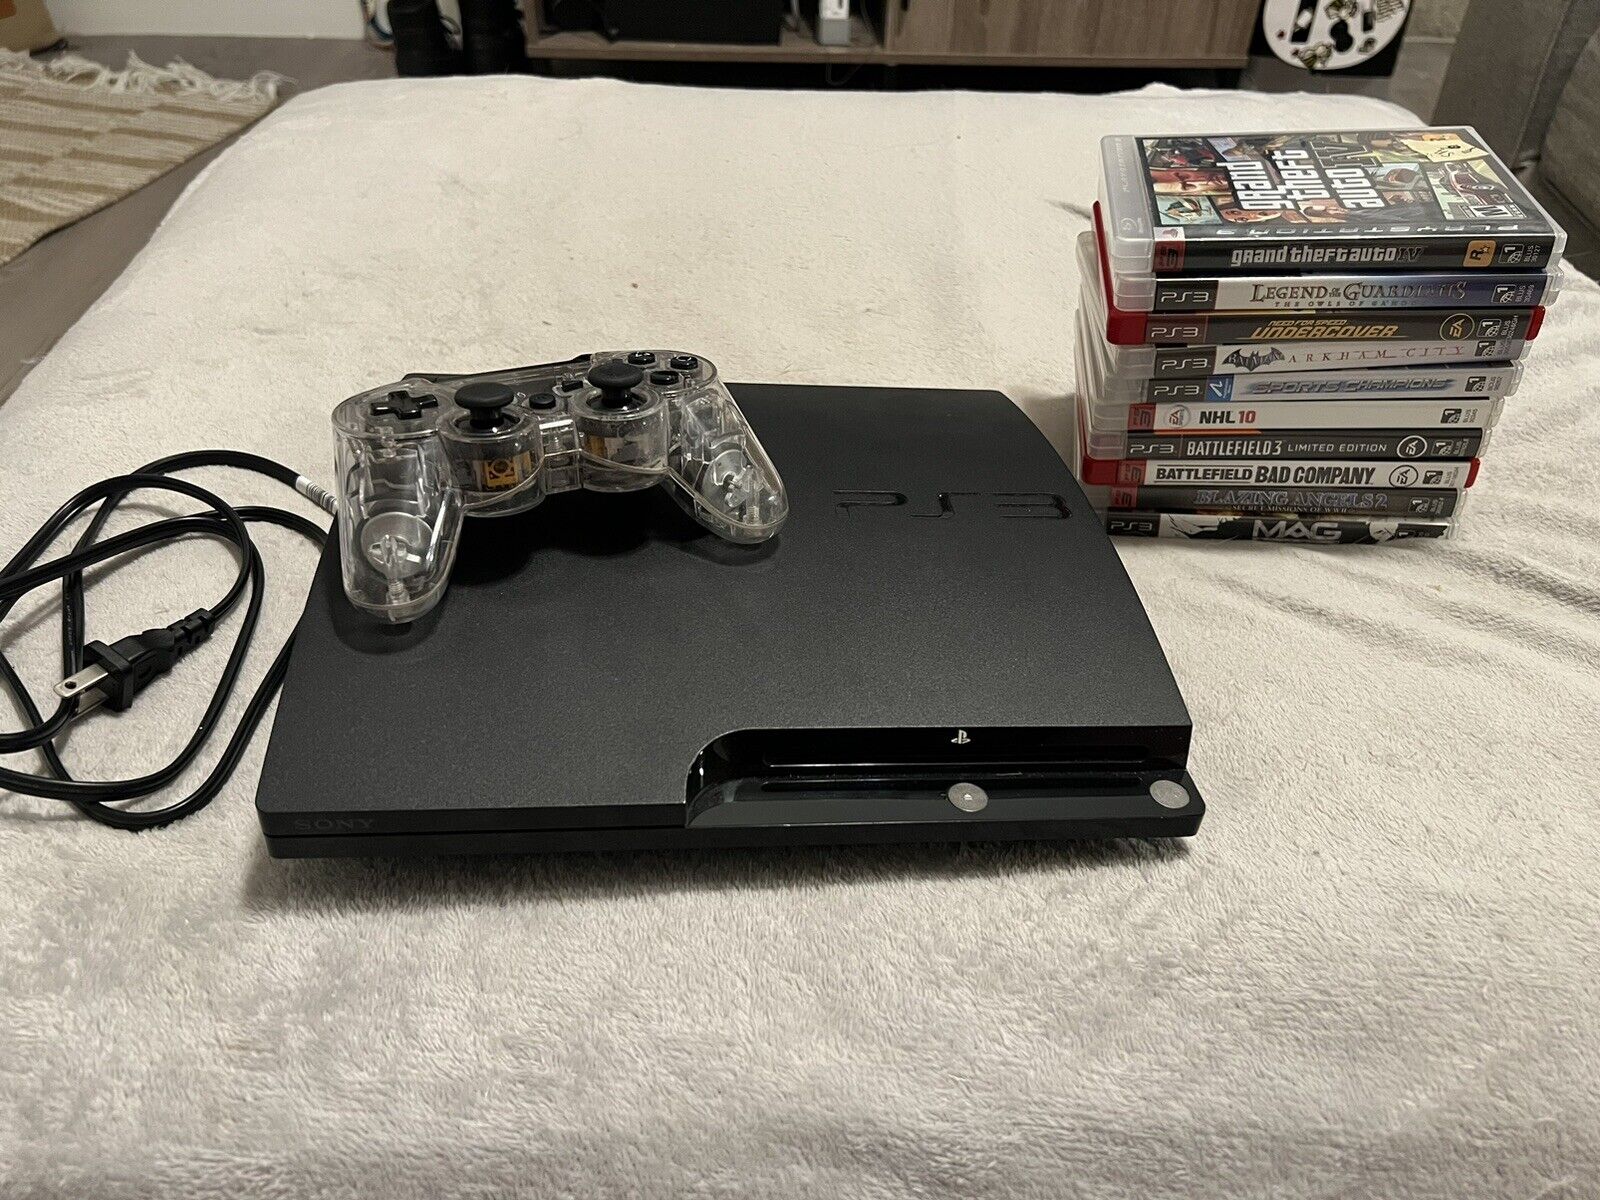 Sony PlayStation 3 Slim Black TESTED WORKING WITH GAMES AND CONTROLLER